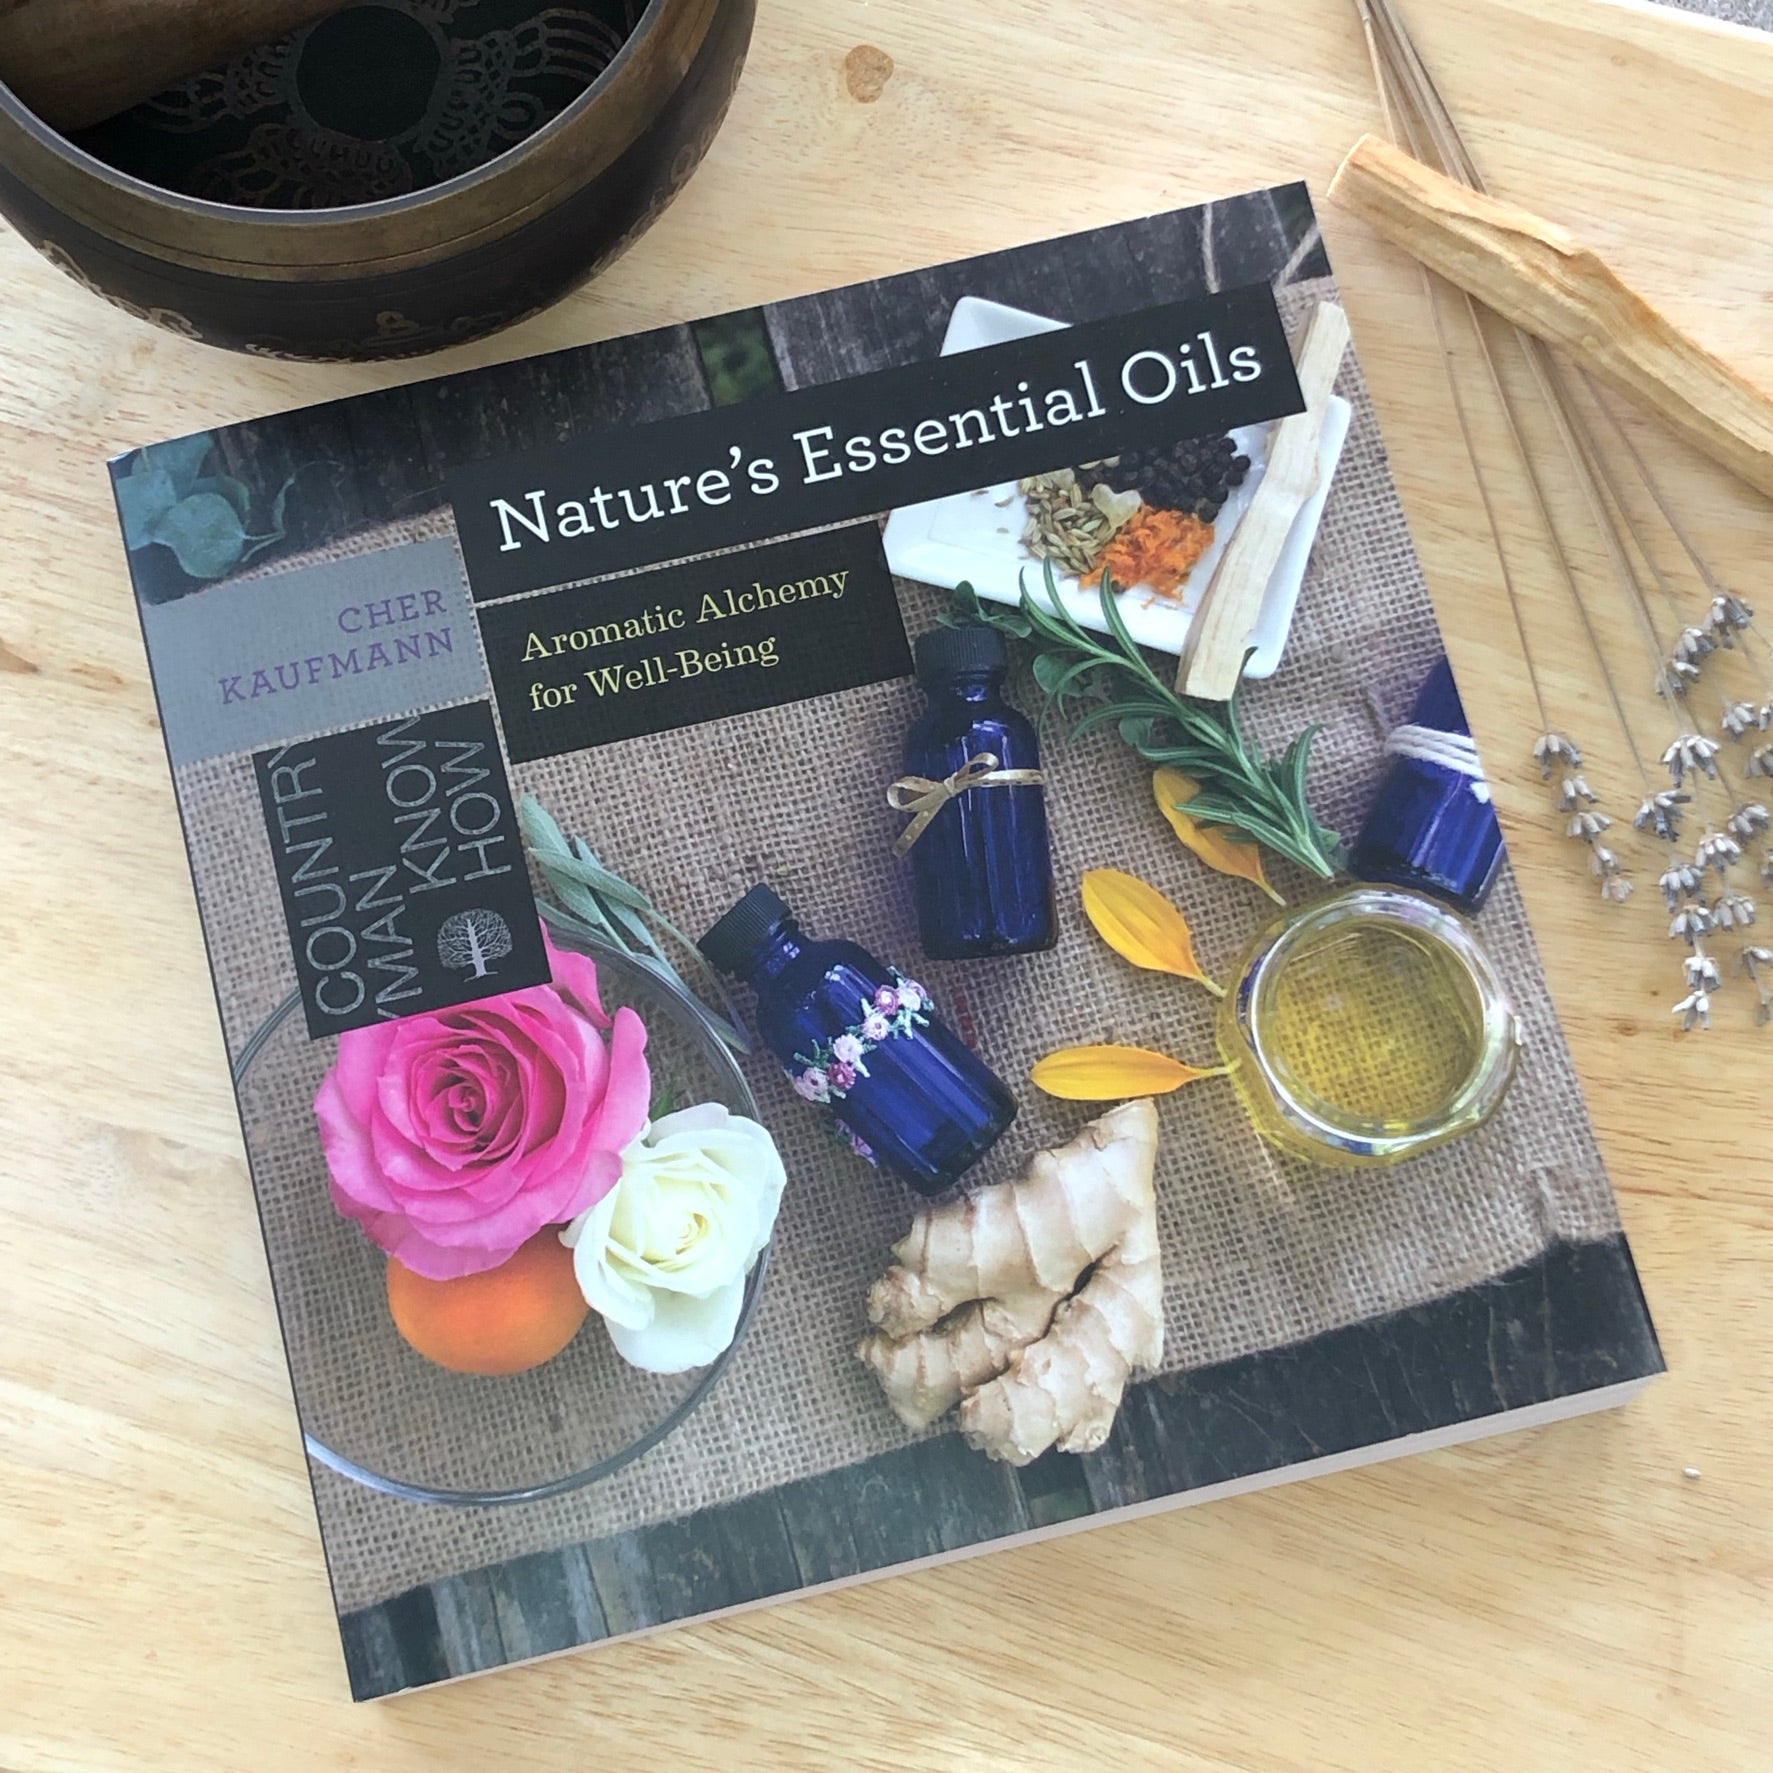 Nature’s Essential Oils; Aromatic Alchemy for Well-Being